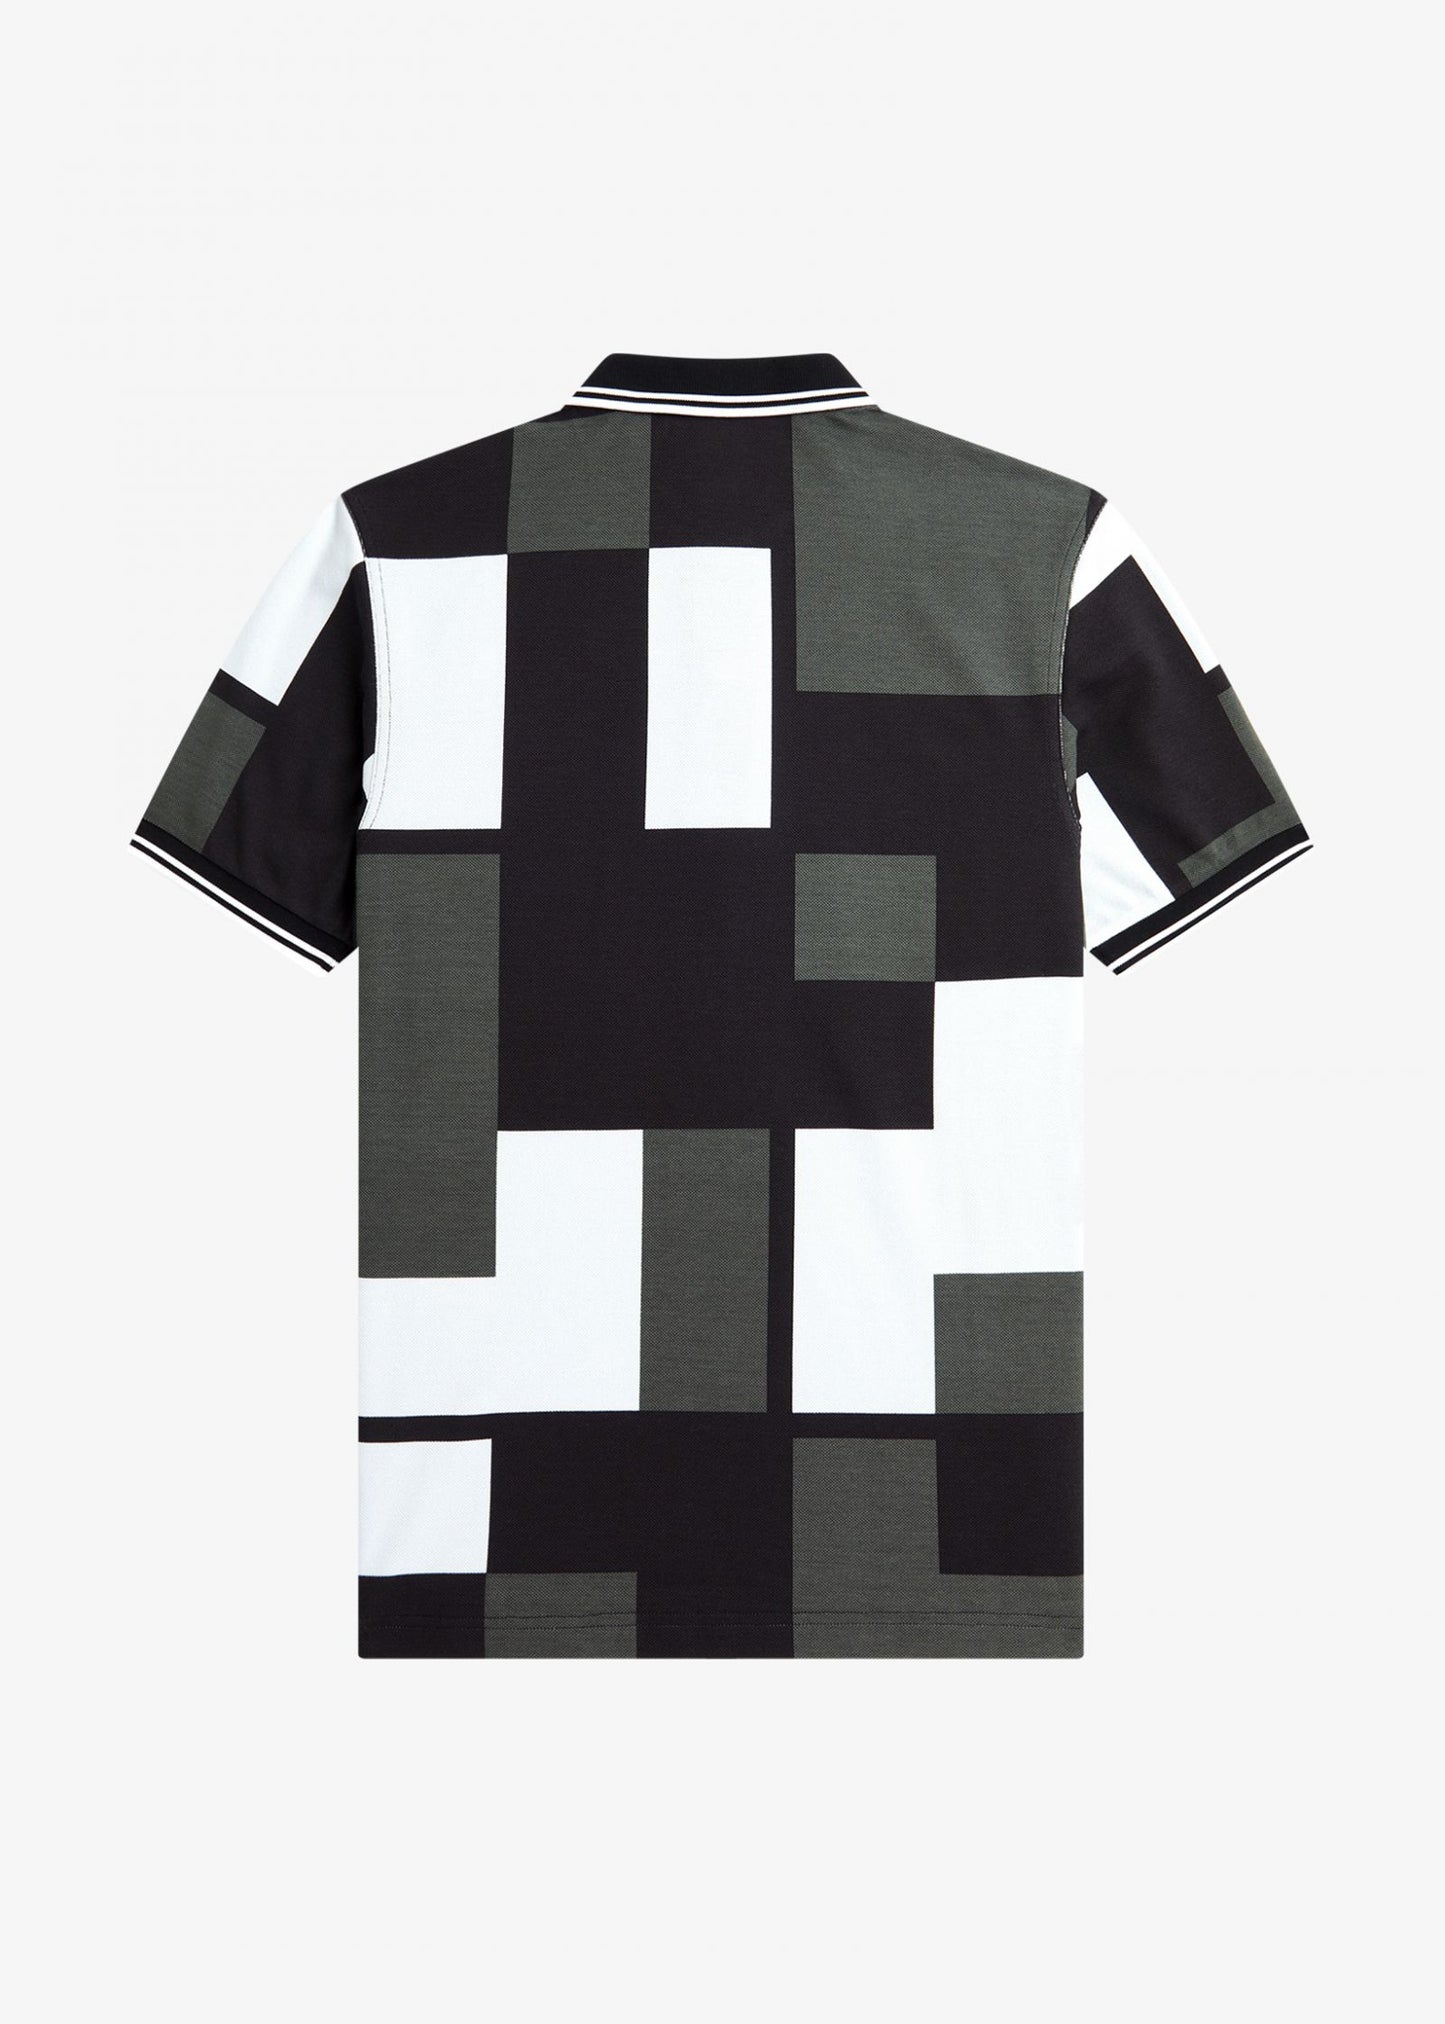 Pixel print fred perry shirt - light ice